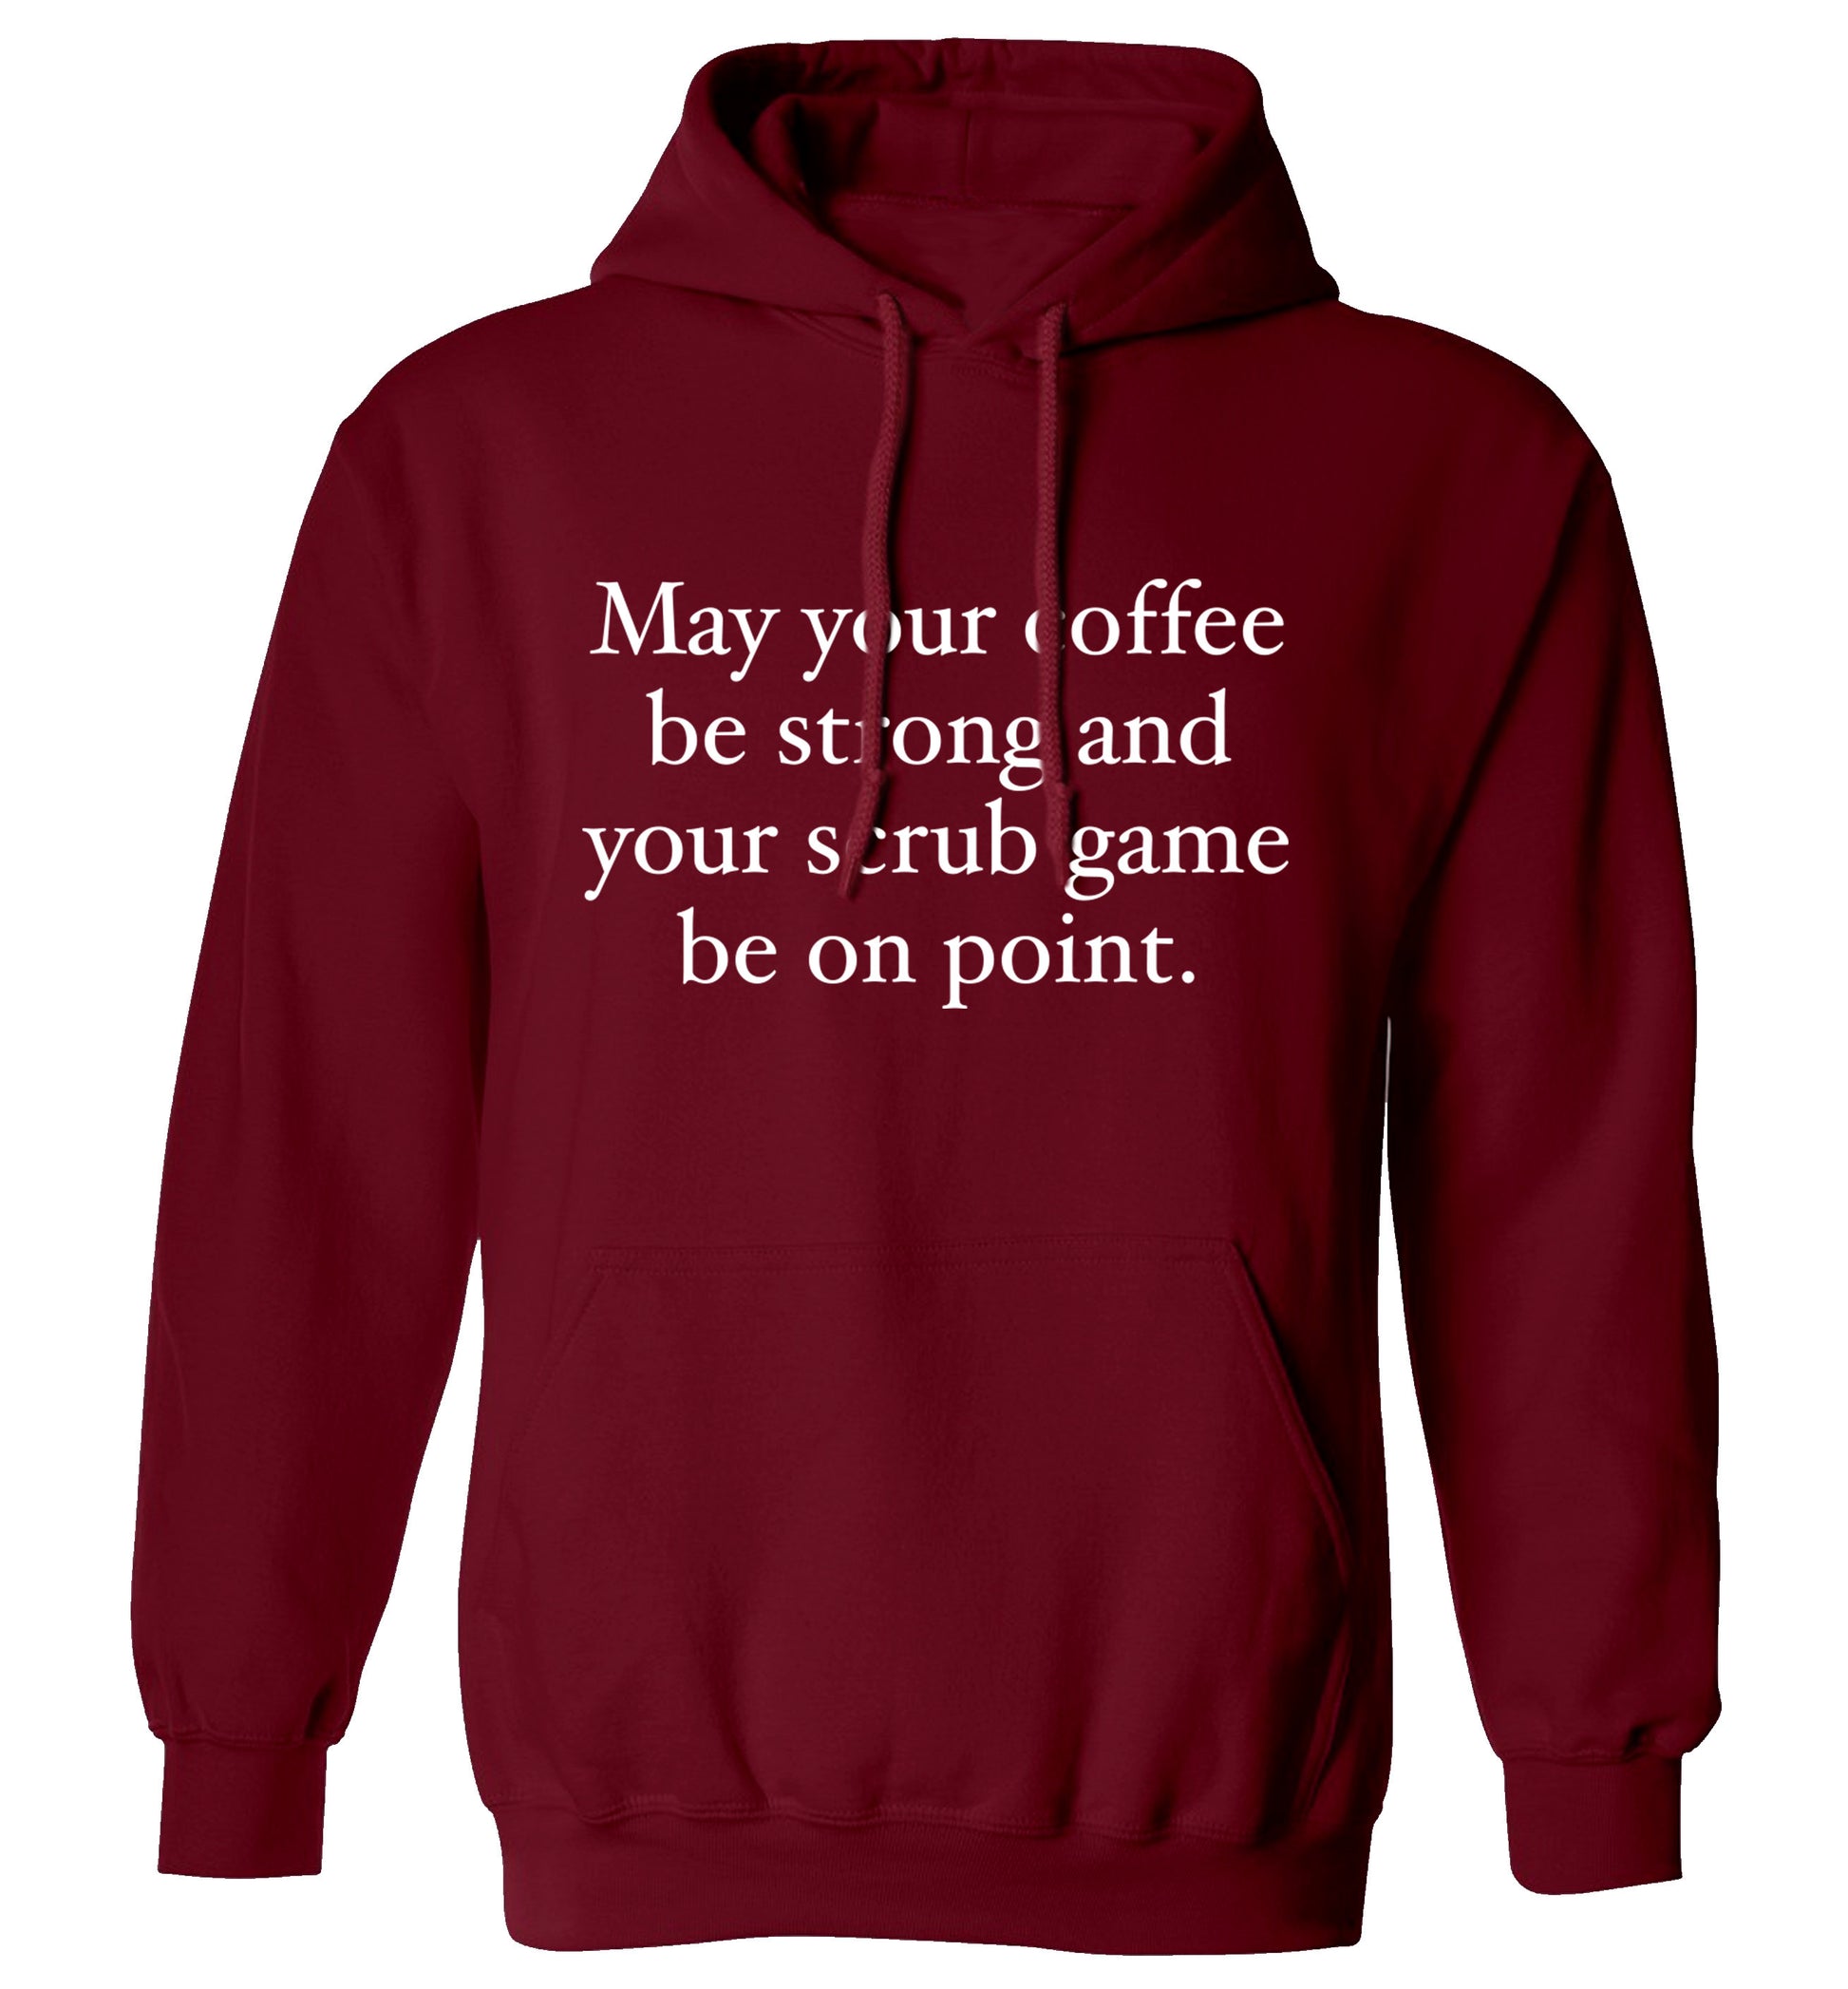 May your caffeine be strong and your scrub game be on point adults unisex maroon hoodie 2XL